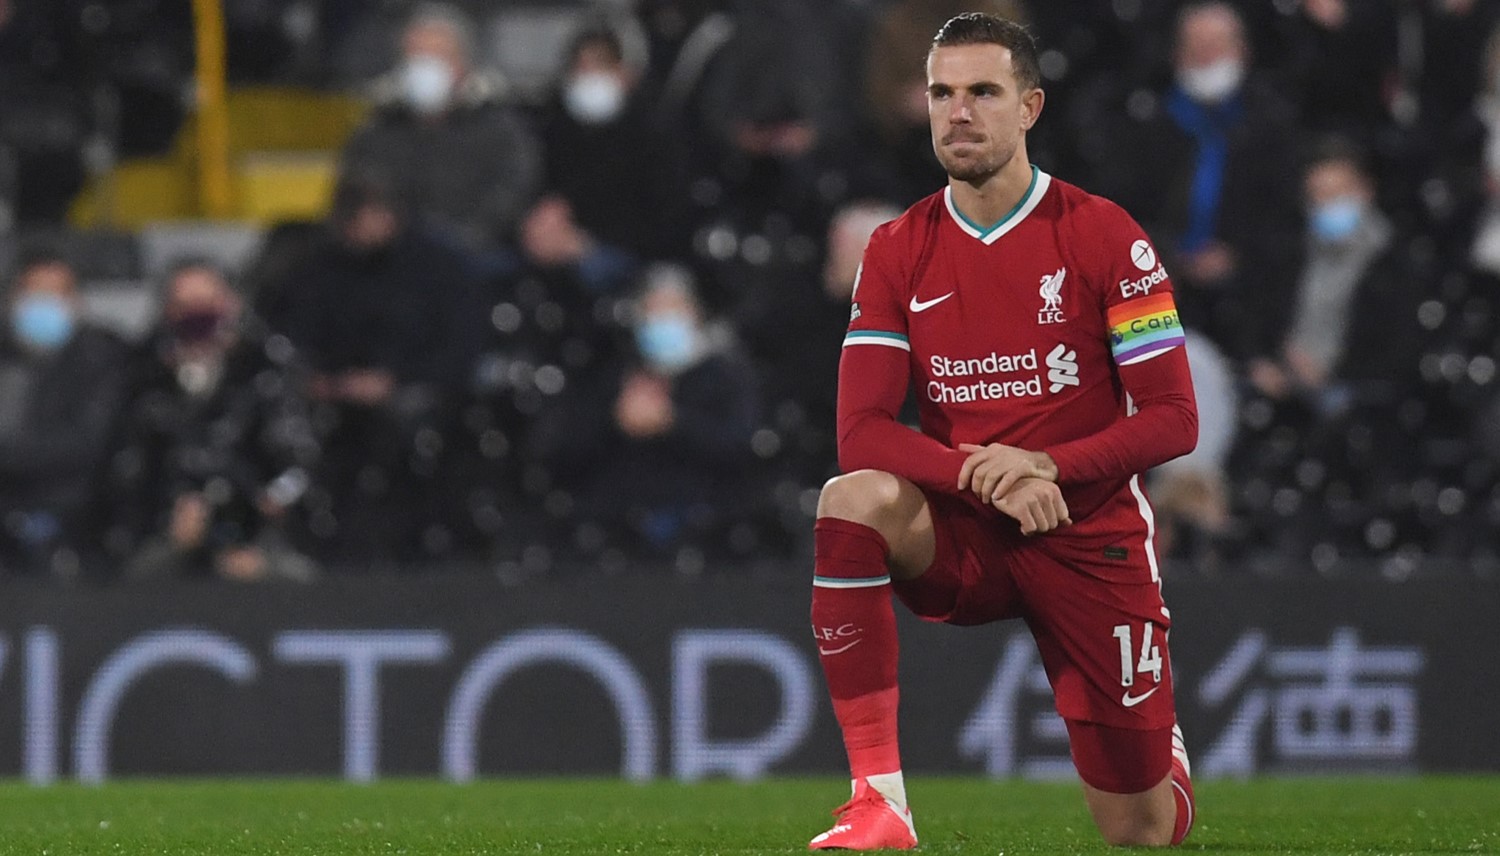 Jordan Henderson: ‘As long as we are still talking about fighting racism, taking the knee should carry on’